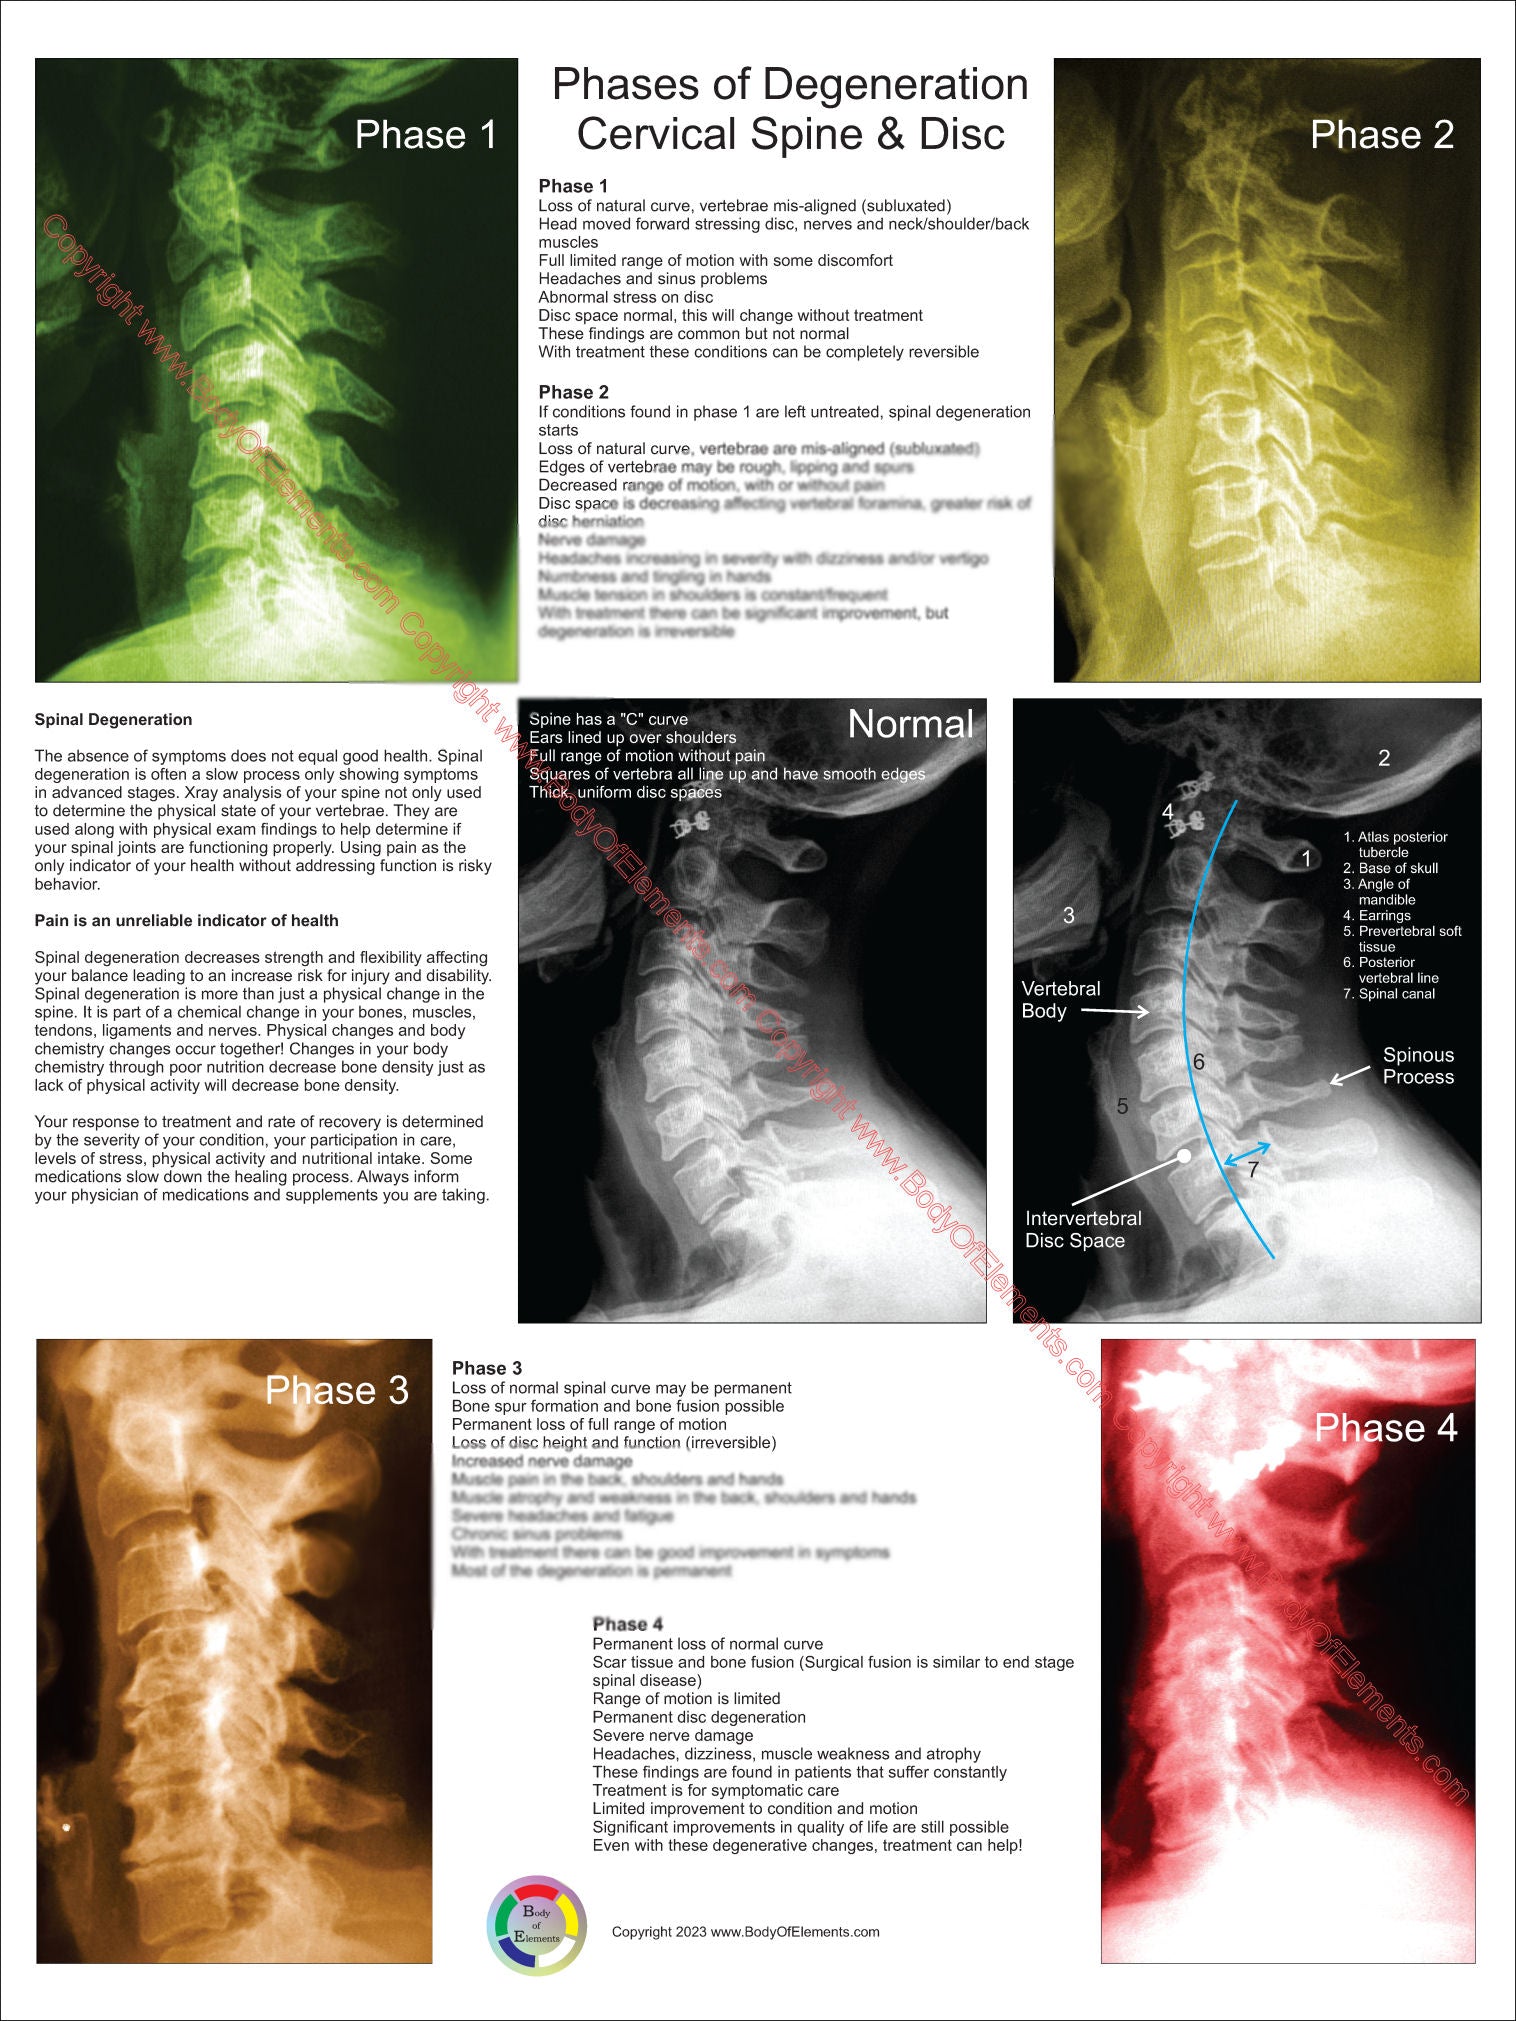 Phases of degeneration cervical spine and disc